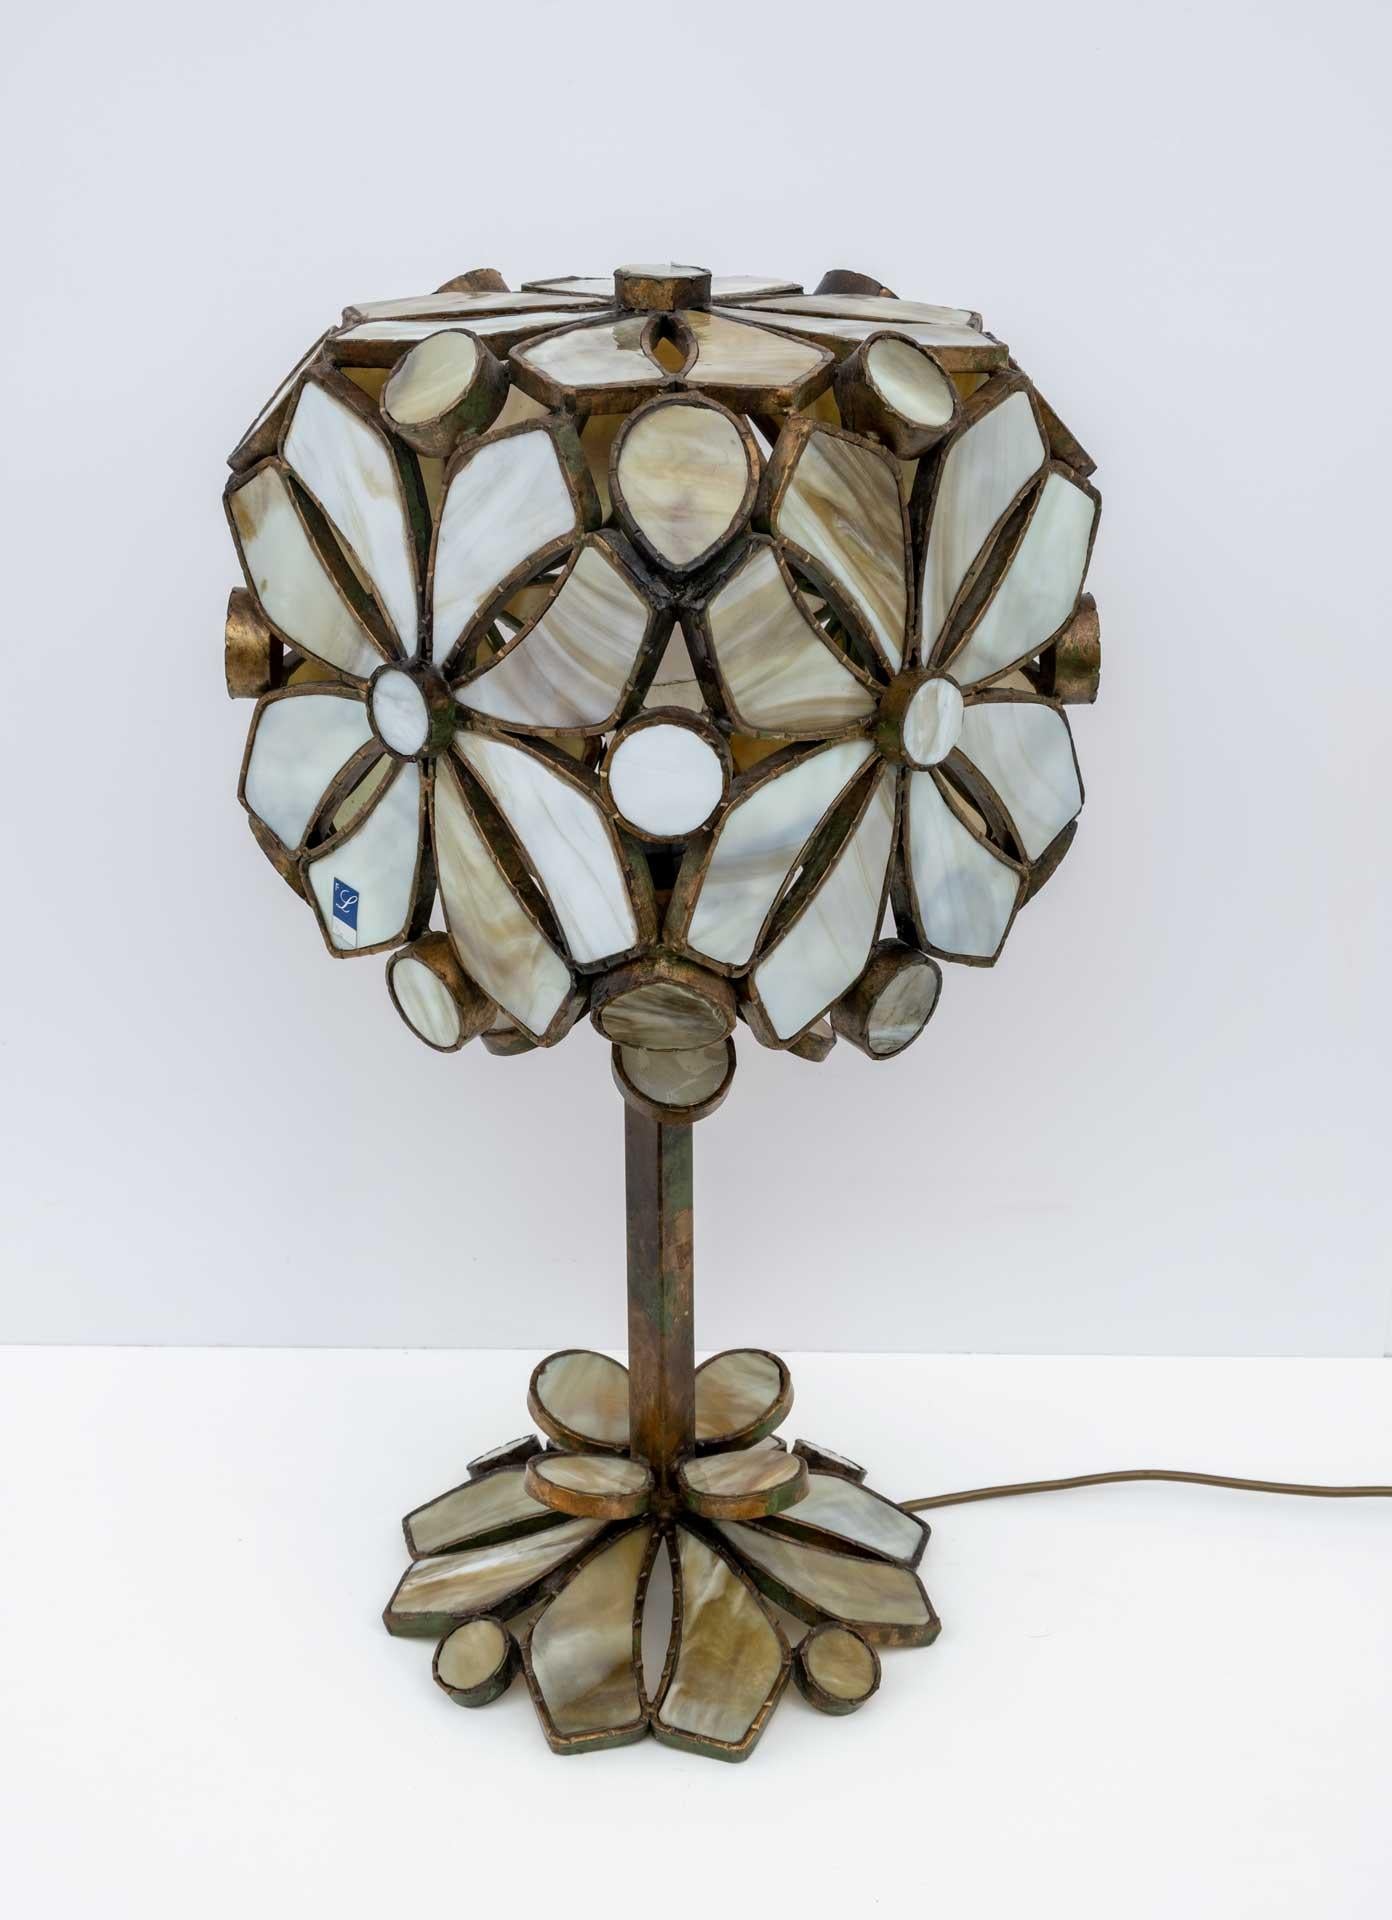 Rare Brutalist Italian Glass Paste and Wrought Iron Table Lamp by Longobard, 70s For Sale 2